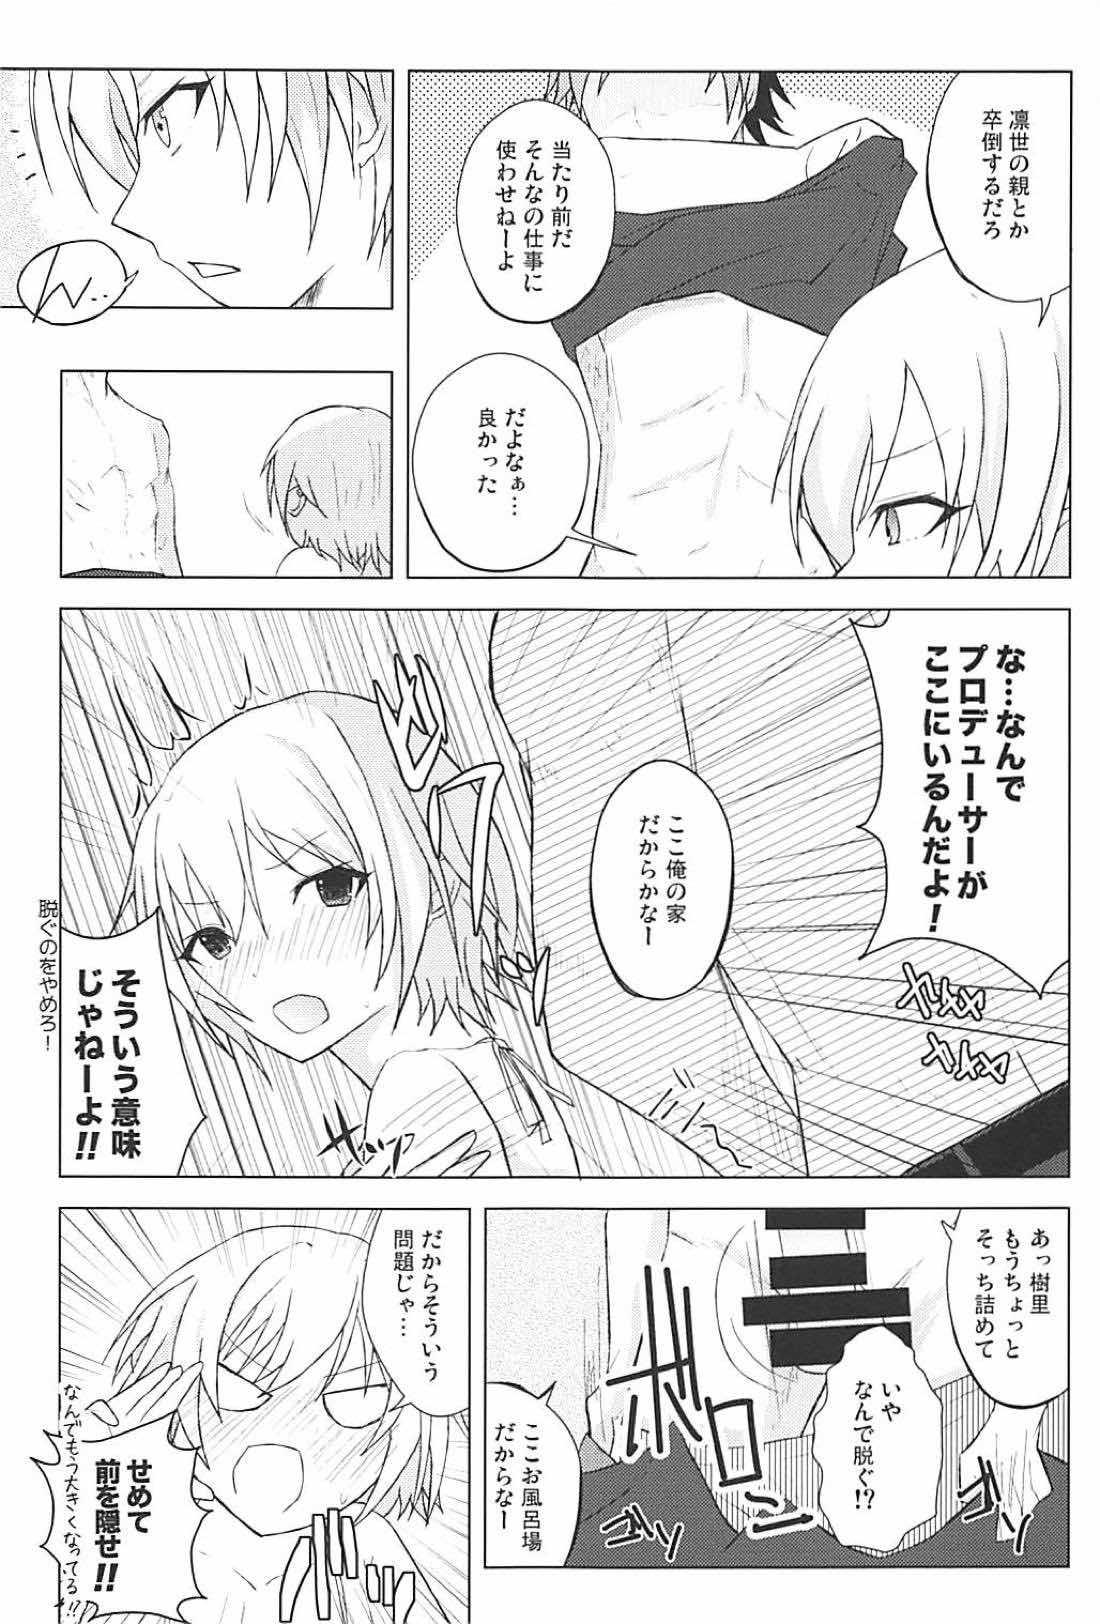 Japan Houkago no Junjou Otome - The idolmaster Chacal - Page 9